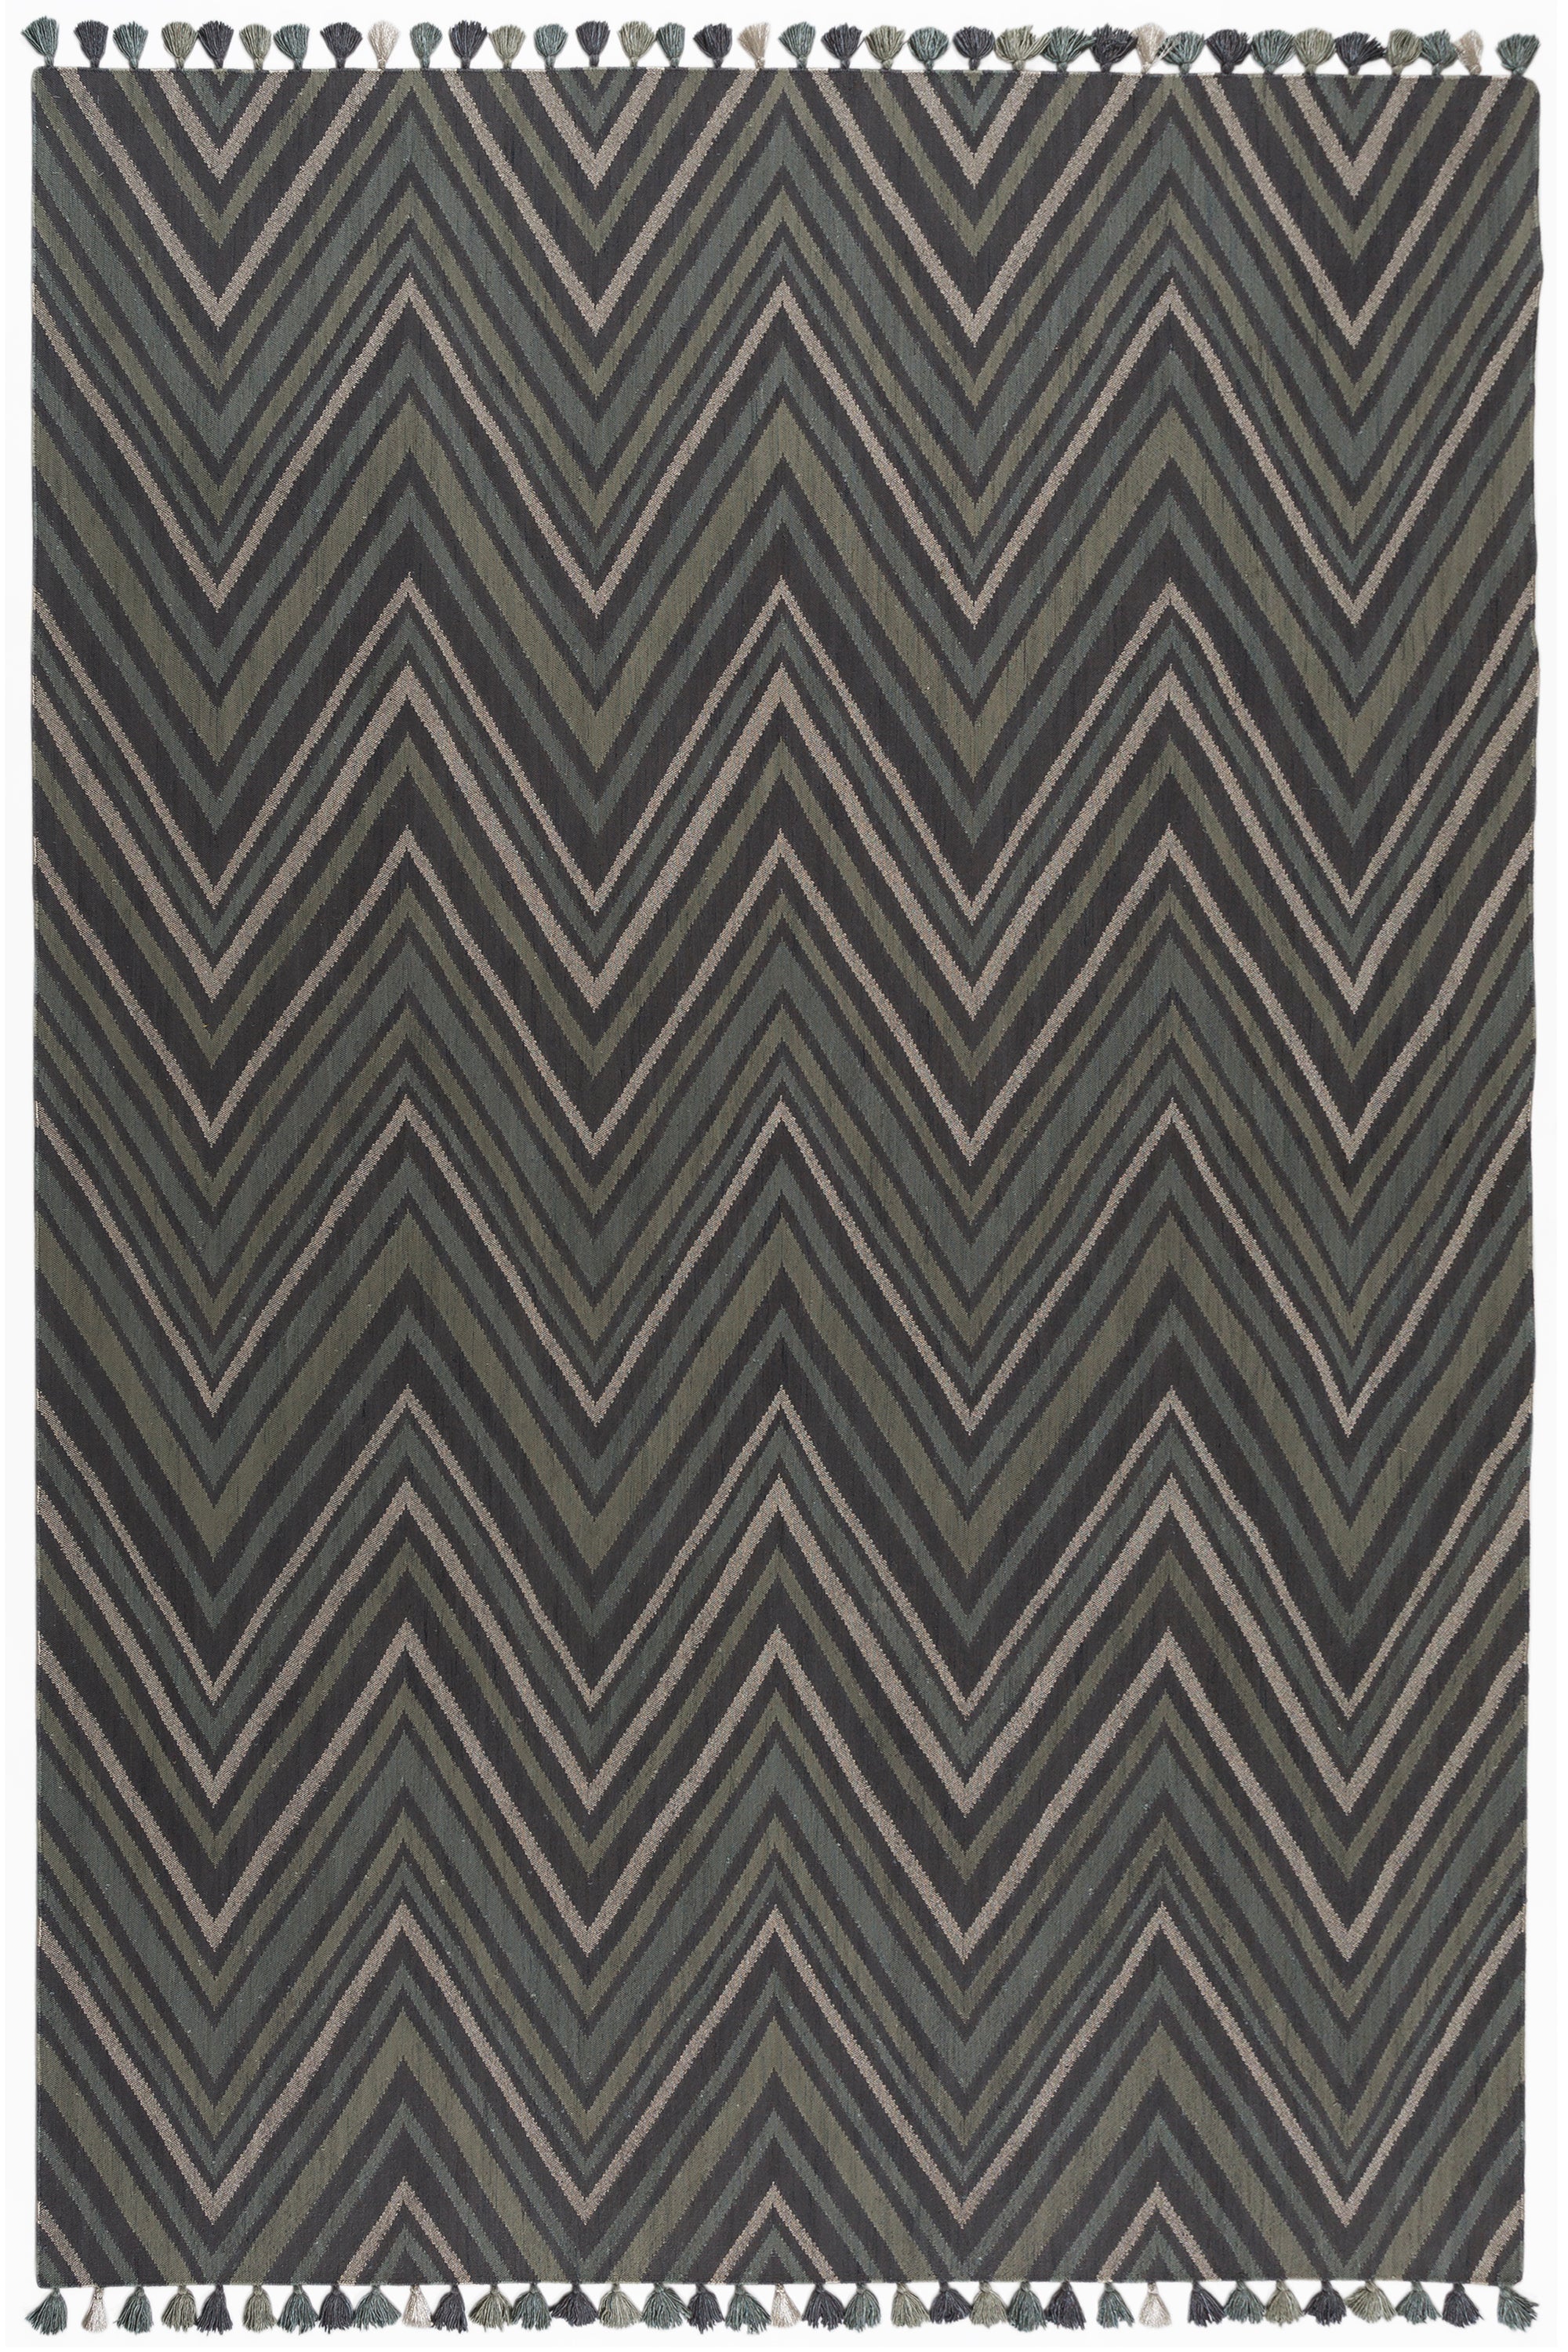 Full size To The Point Rug in Pyrite-Metallic, a zig zag pattern in dark greens, metallic ecru and black, with a mulit color tasseled edge. 